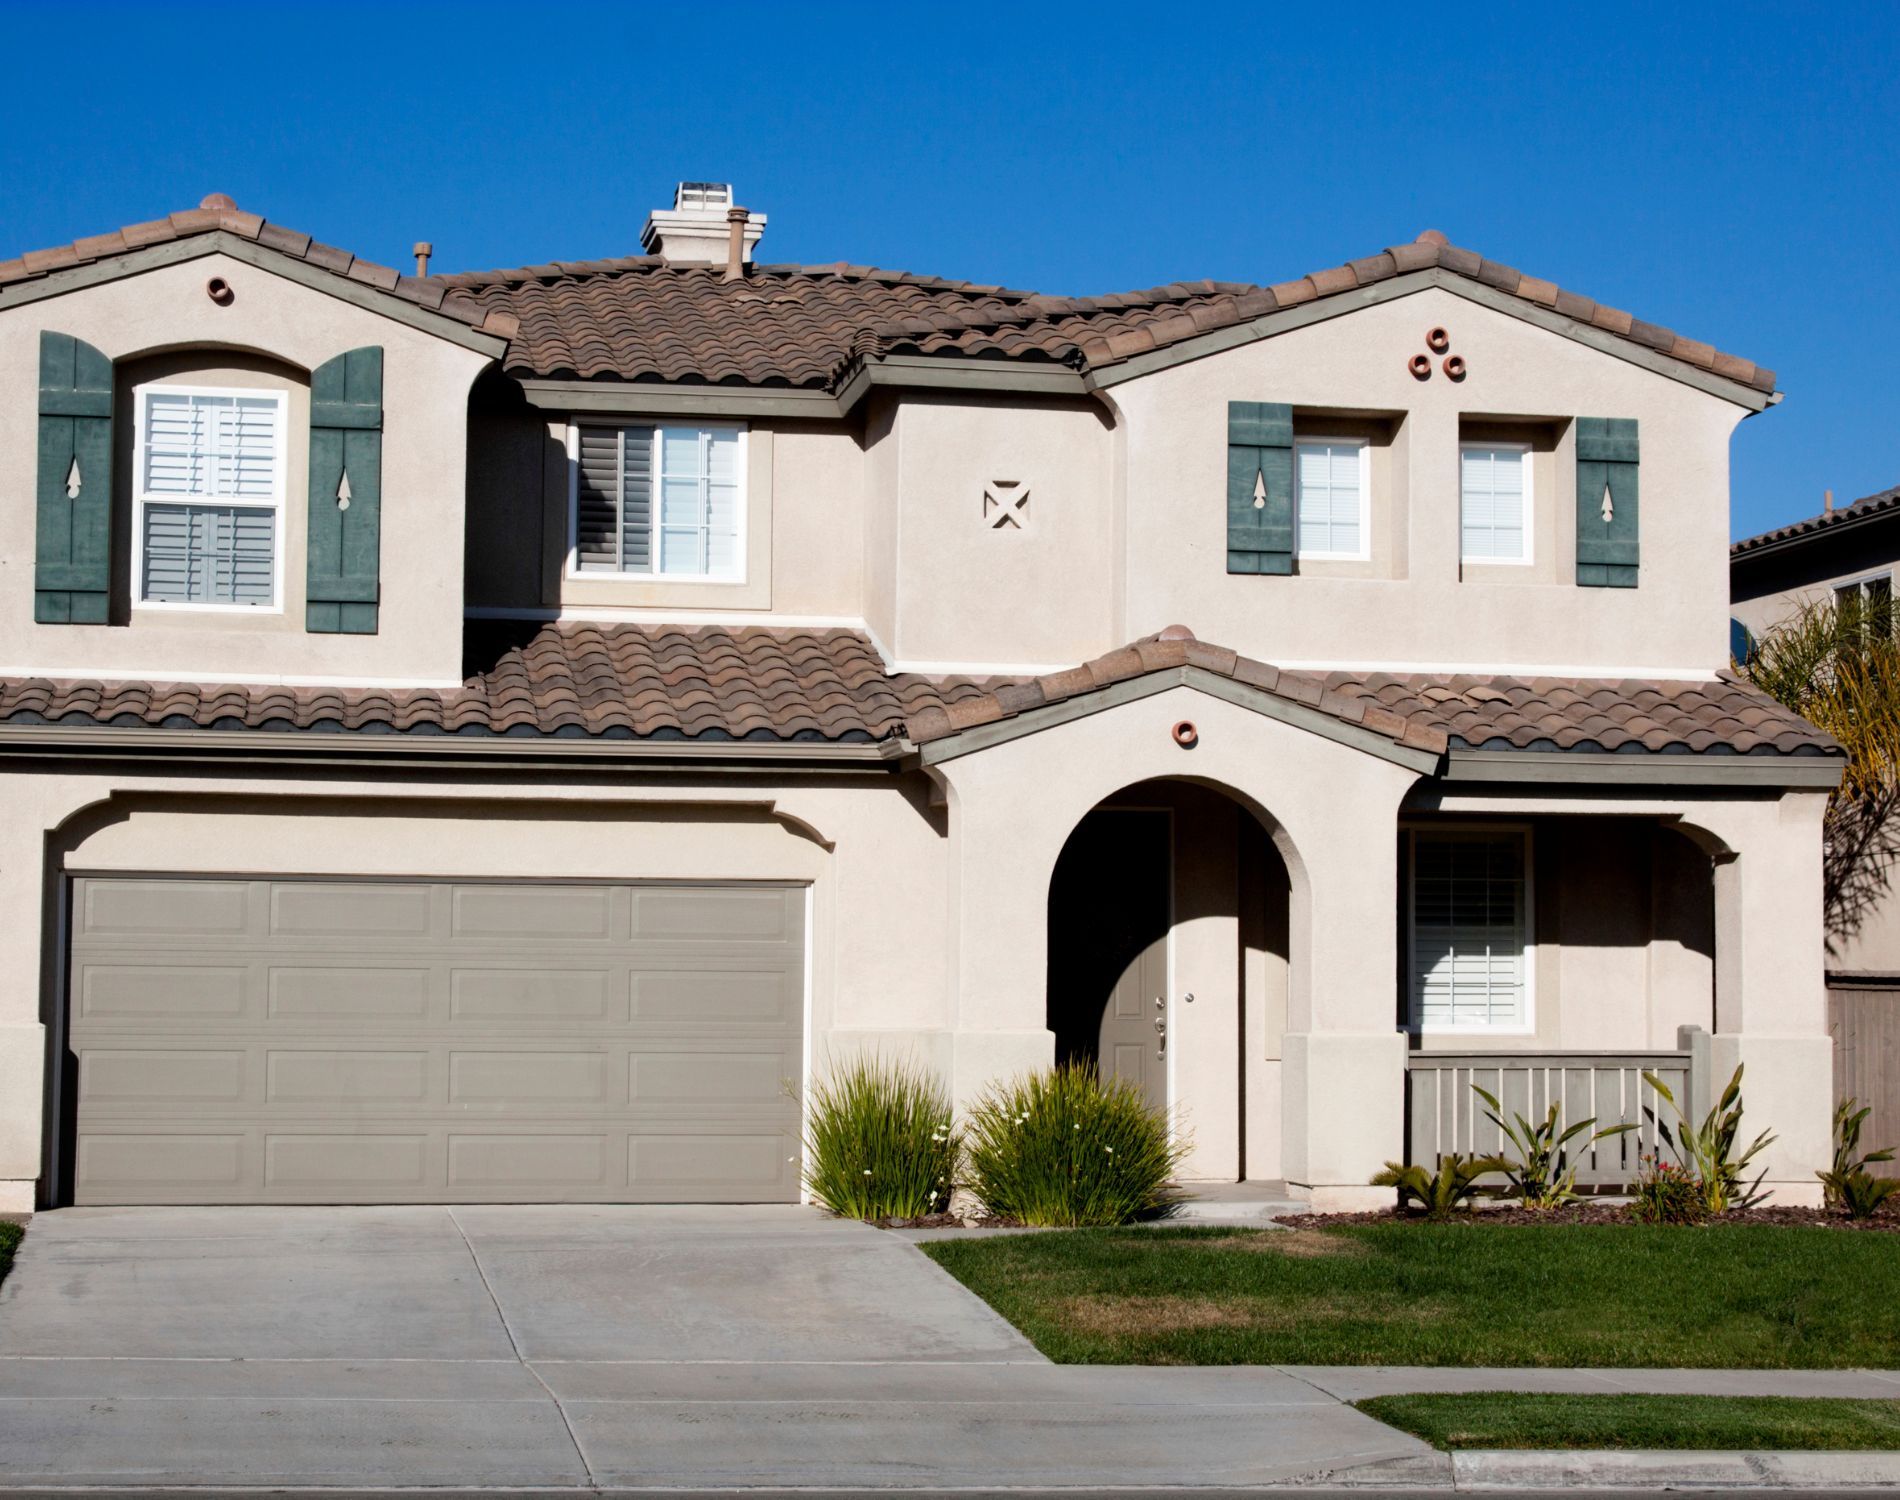 TOP STUCCO SEALING SERVICES FOR LASTING BEAUTY, STUCCO CONTRACTORS TAMPA FL